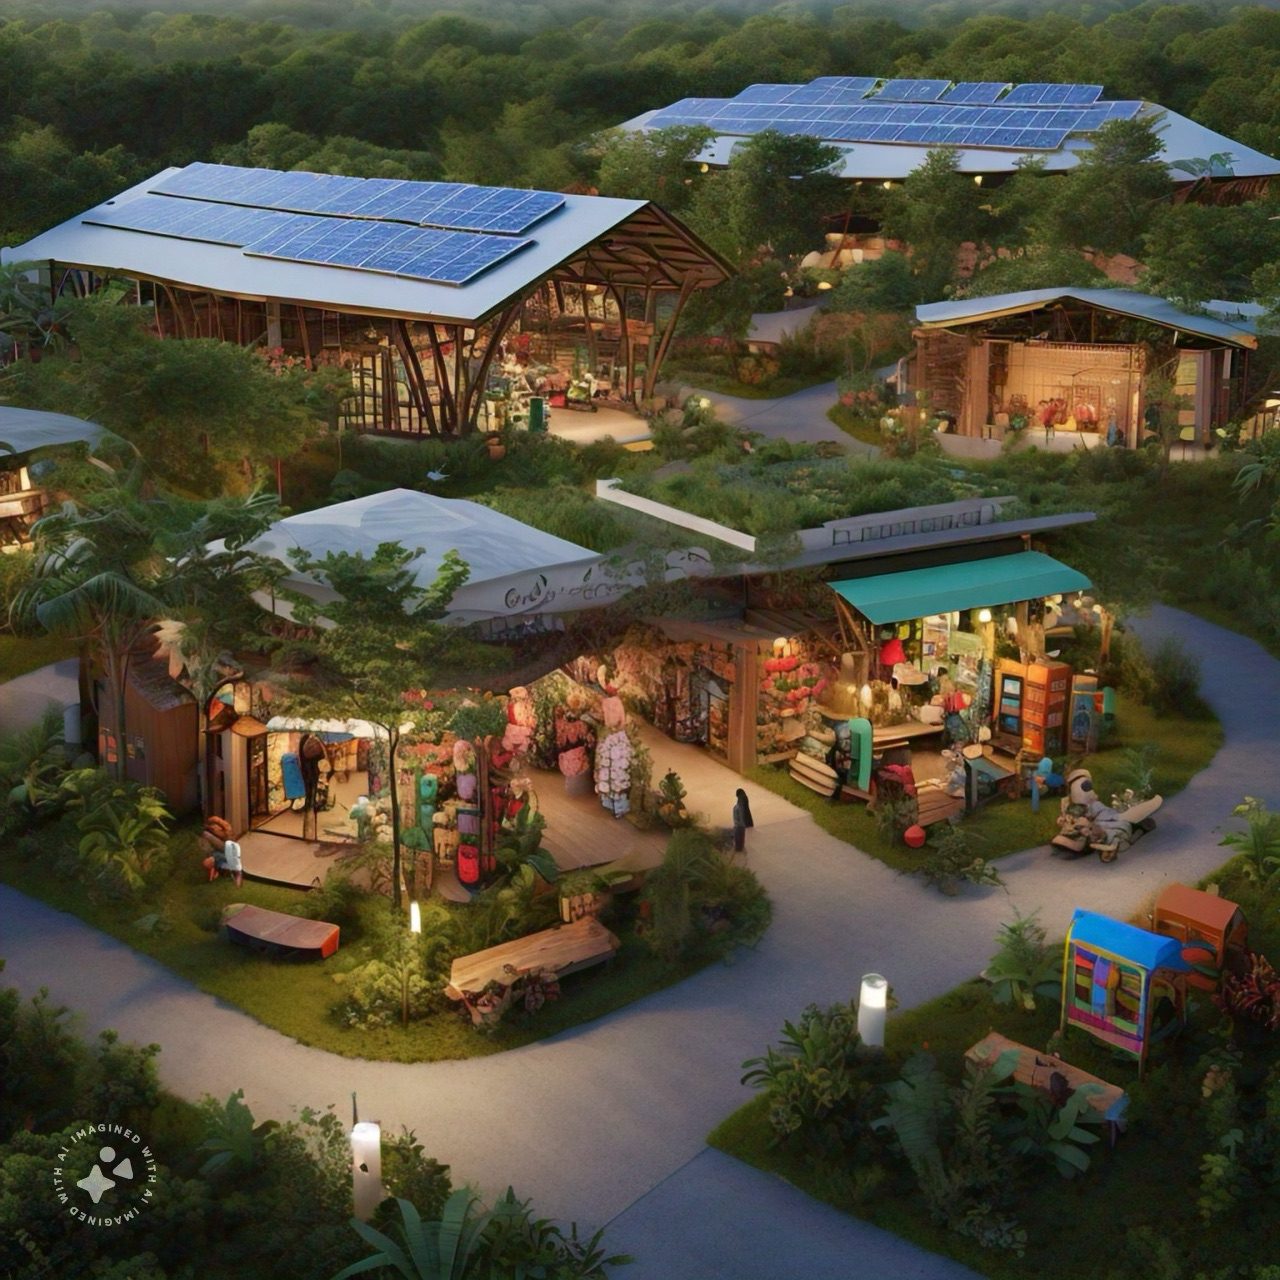 An Eco village with a shopping nook at the centre